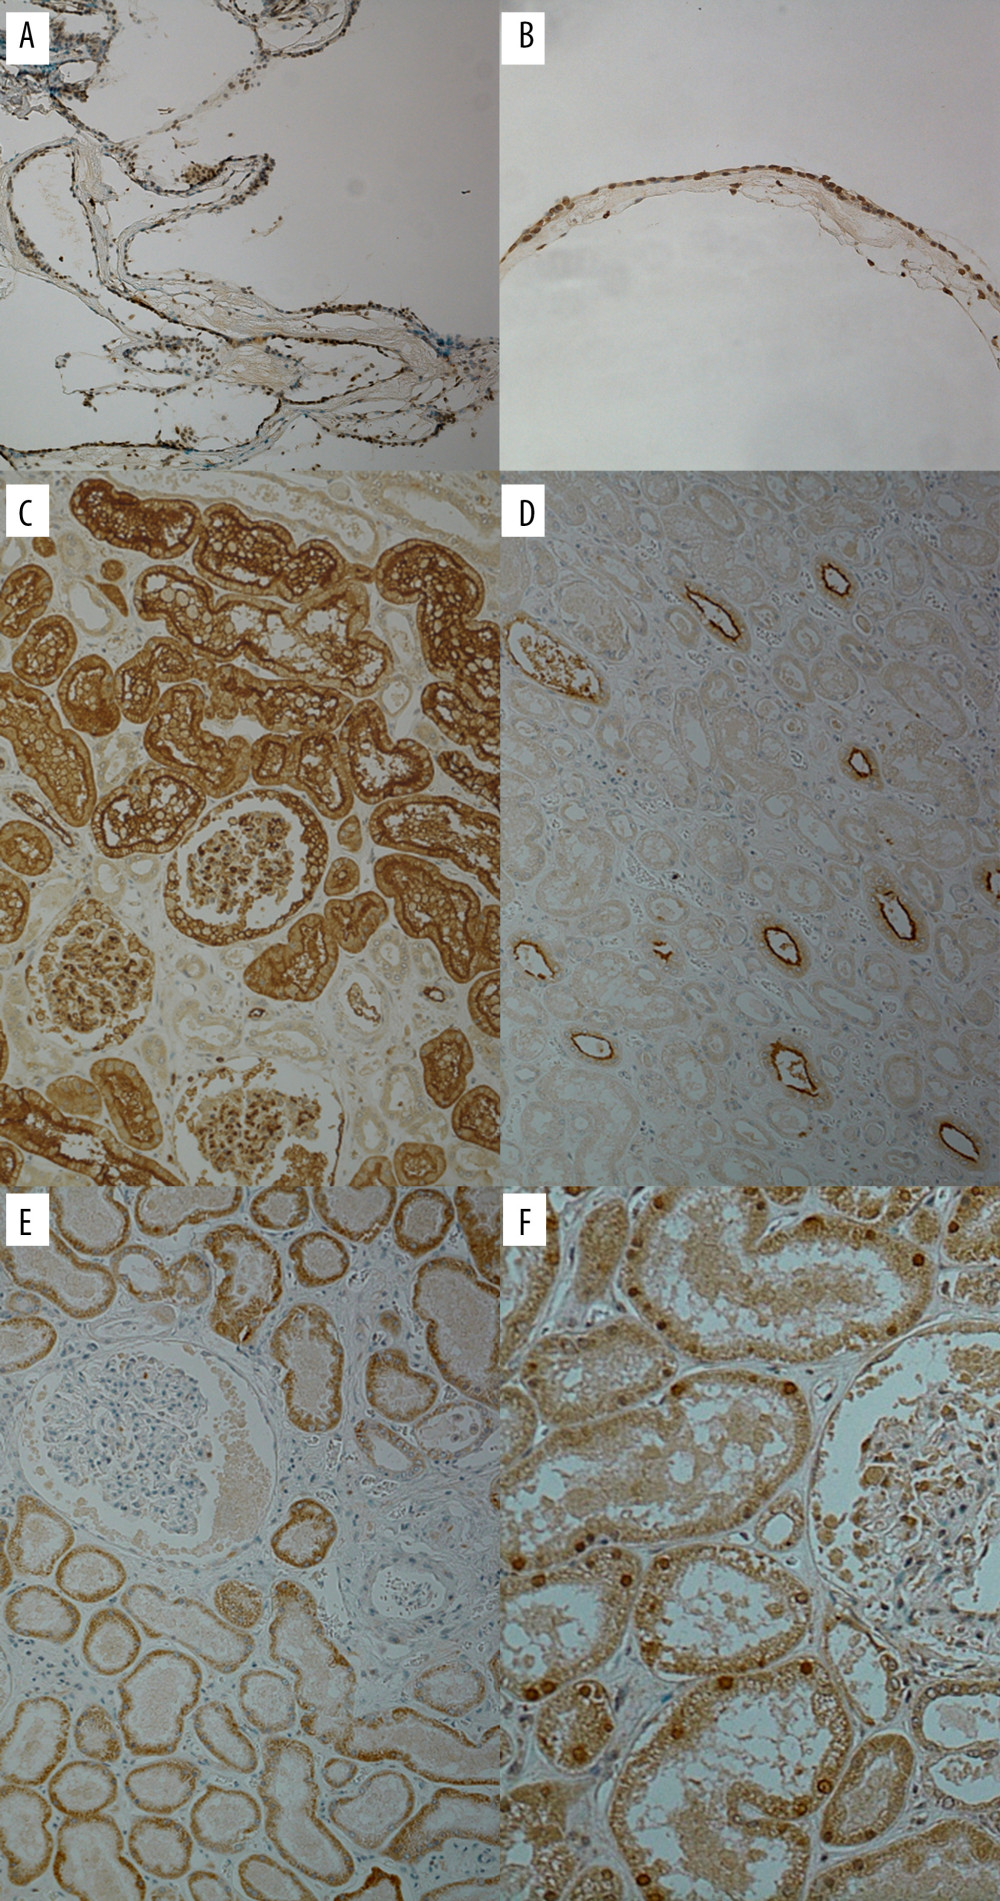 Aquaporin staining. The specimen from Case 1 stains positive for aquaporin (AQP) 1 (A) and AQP 5 (B). As a control, kidney tissue is stained for AQP 1 (C), 2 (D), 3 (E), and 5 (F). Original magnification is ×20 for B and F, while the rest are ×10.